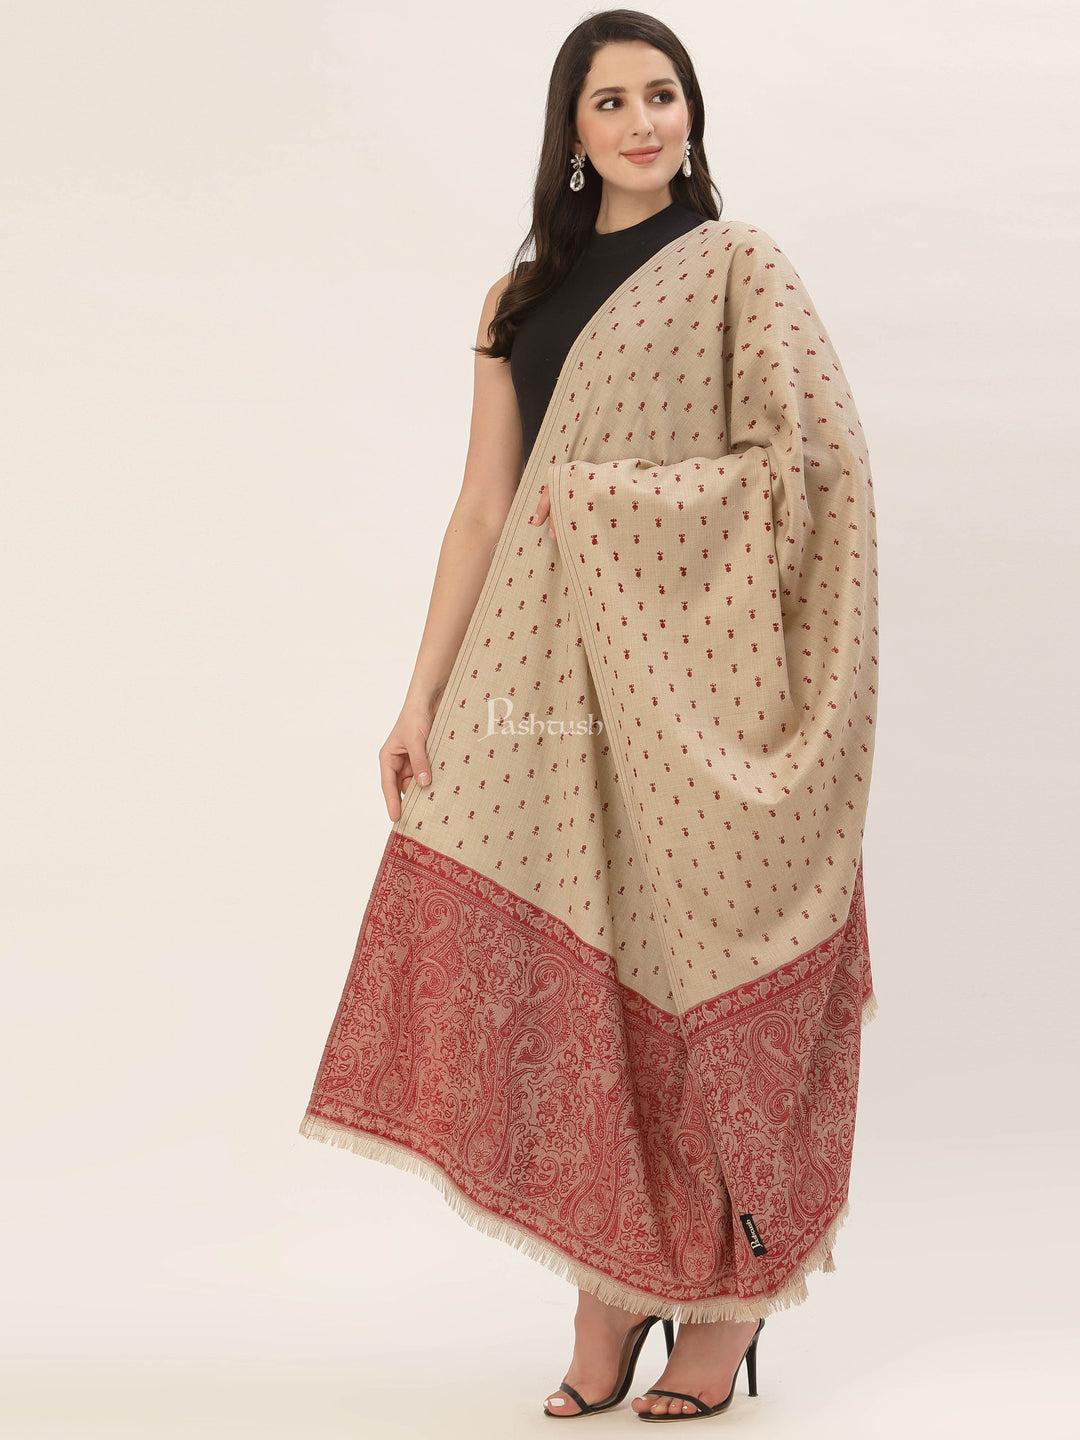 Pashtush India Gift Pack Pashtush His And Her Gift Set Of Fine Wool Stole and Embroidery Shawl With Premium Gift Box Packaging, Rose and Beige